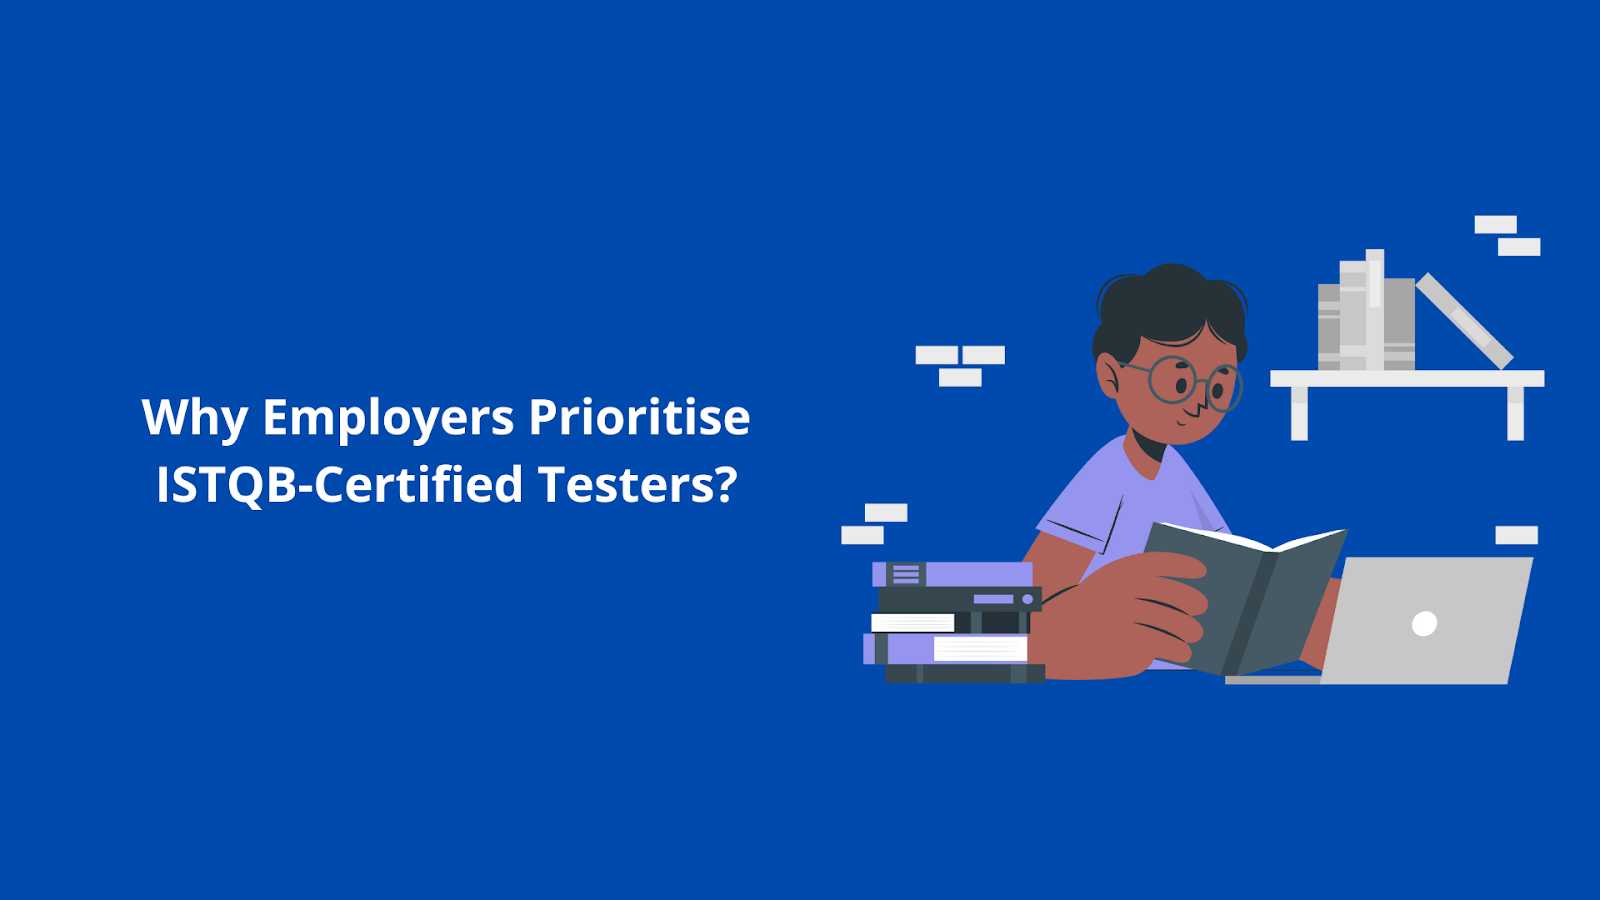 Why Employers Prioritise ISTQB-Certified Testers?